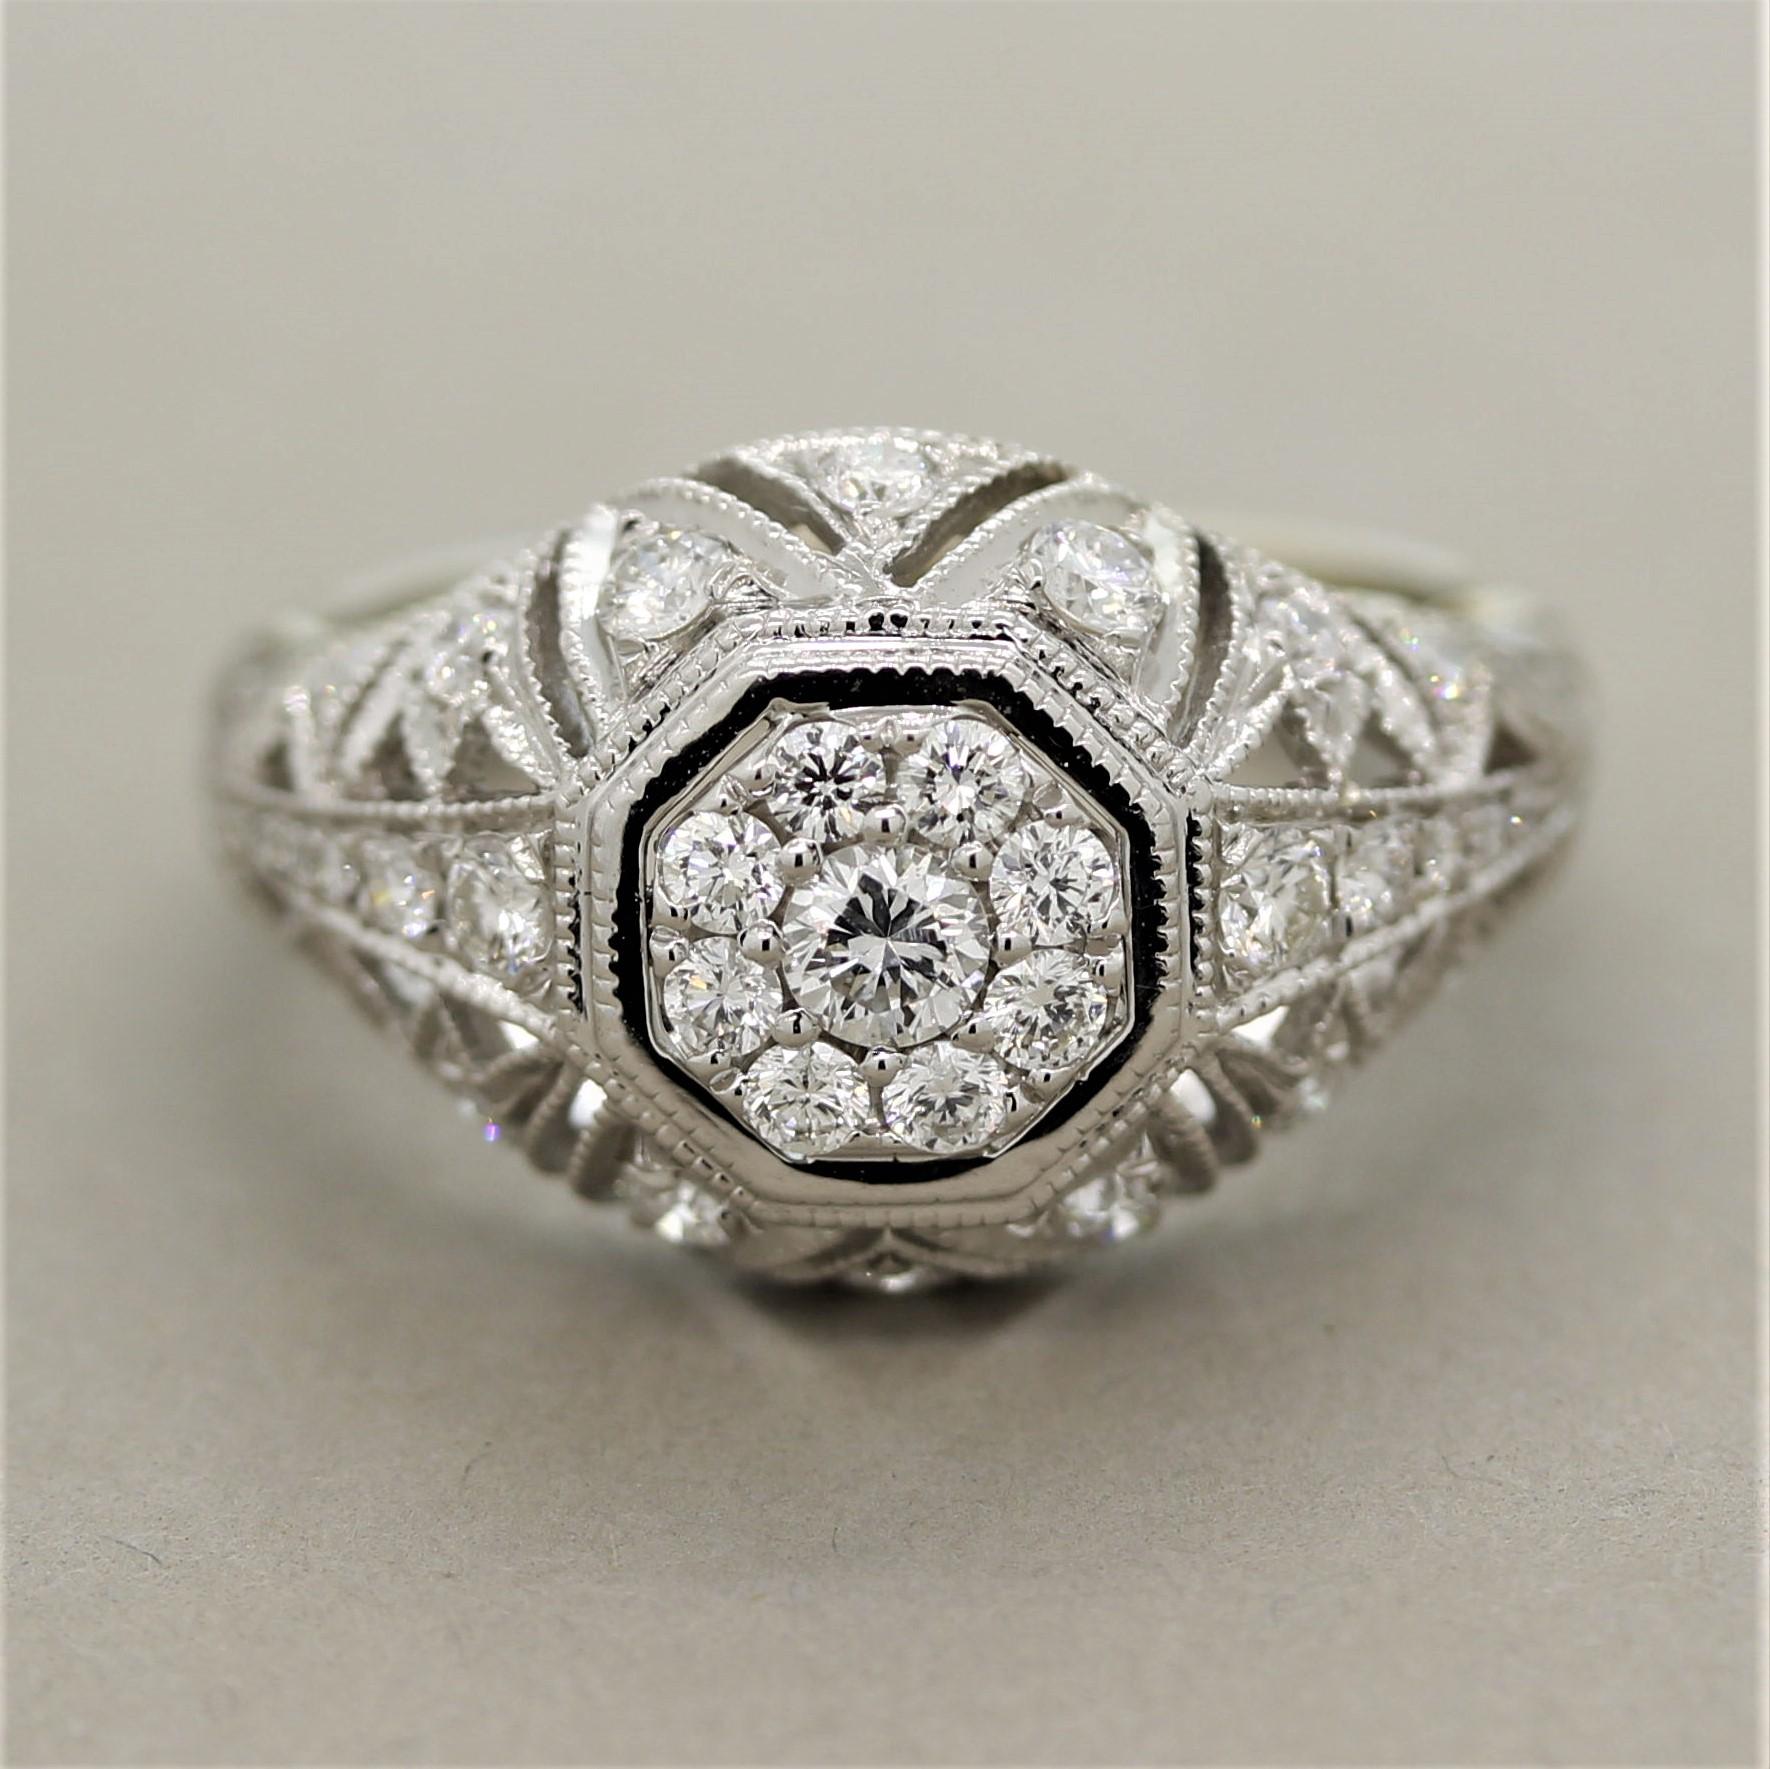 A brand new ring made in the antique Art Deco style! It features 0.75 carats of round brilliant cut diamonds set around the ring. It has classic examples of the Art Deco style which include the milgrain finish around the diamond settings as well as